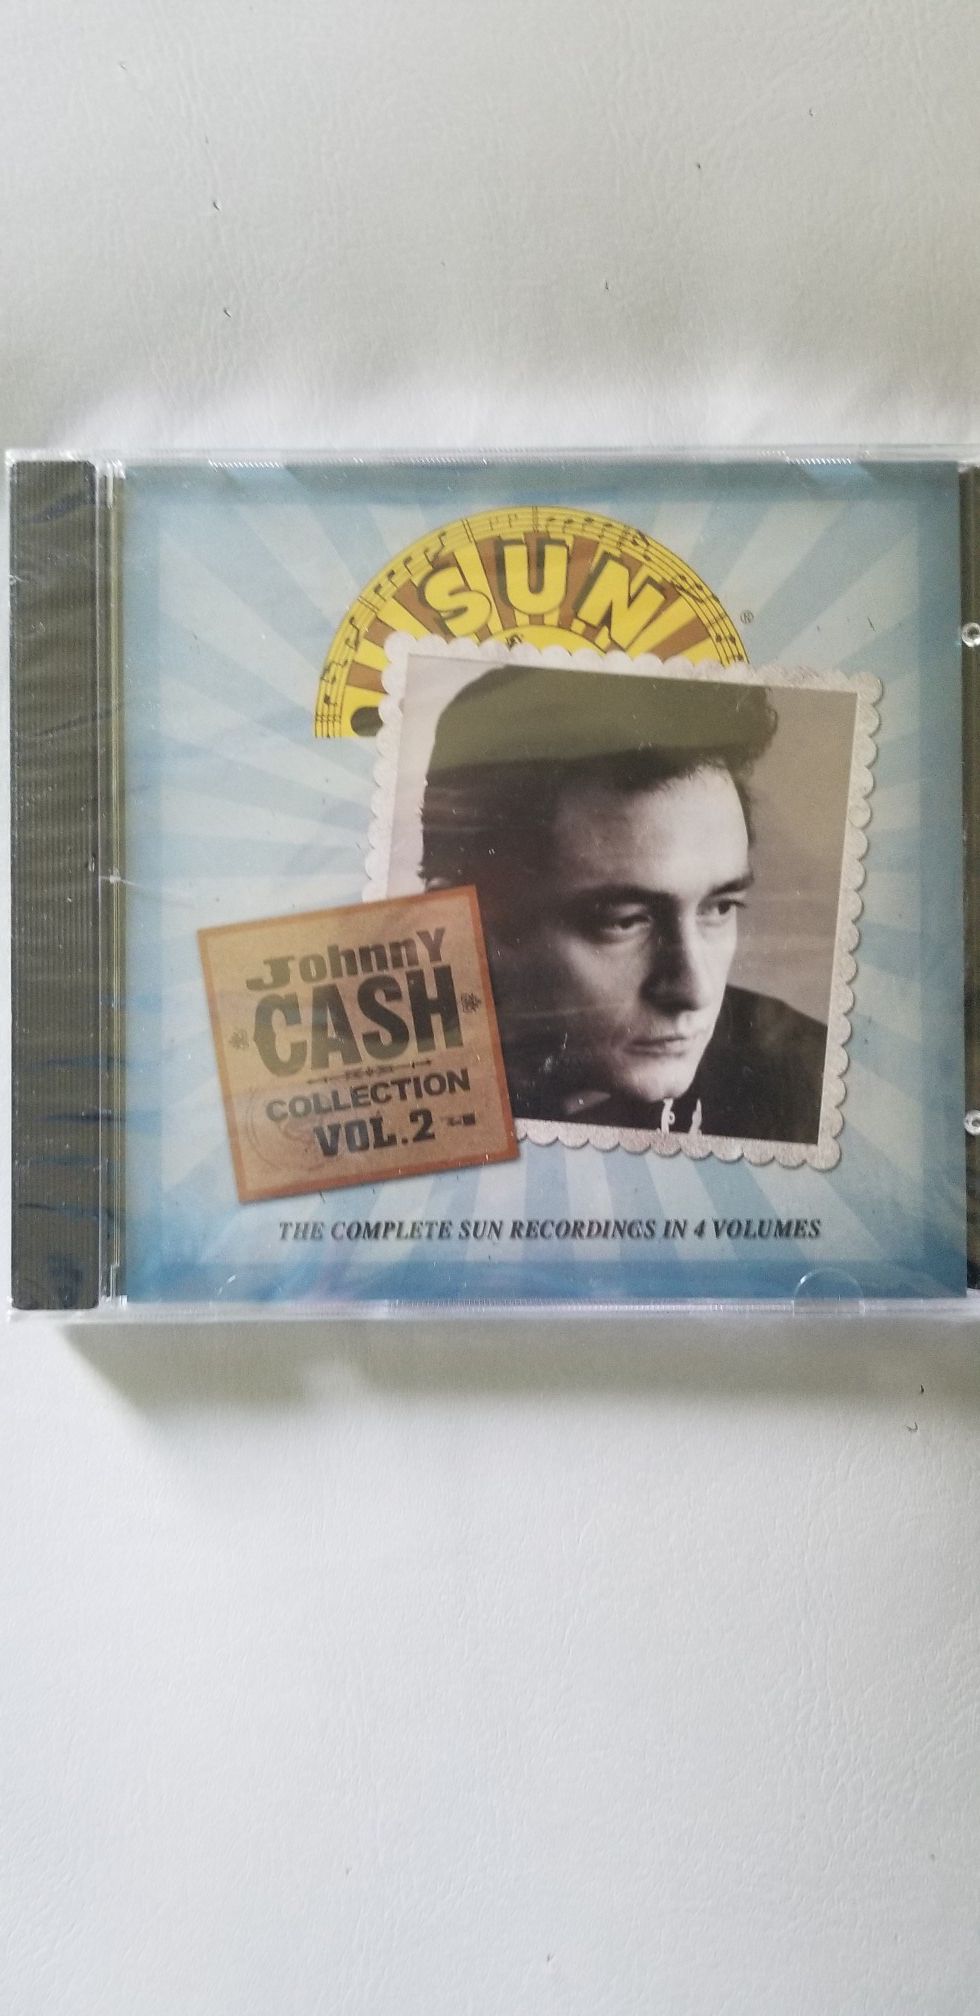 Johnny cash collection vol.2 sealed